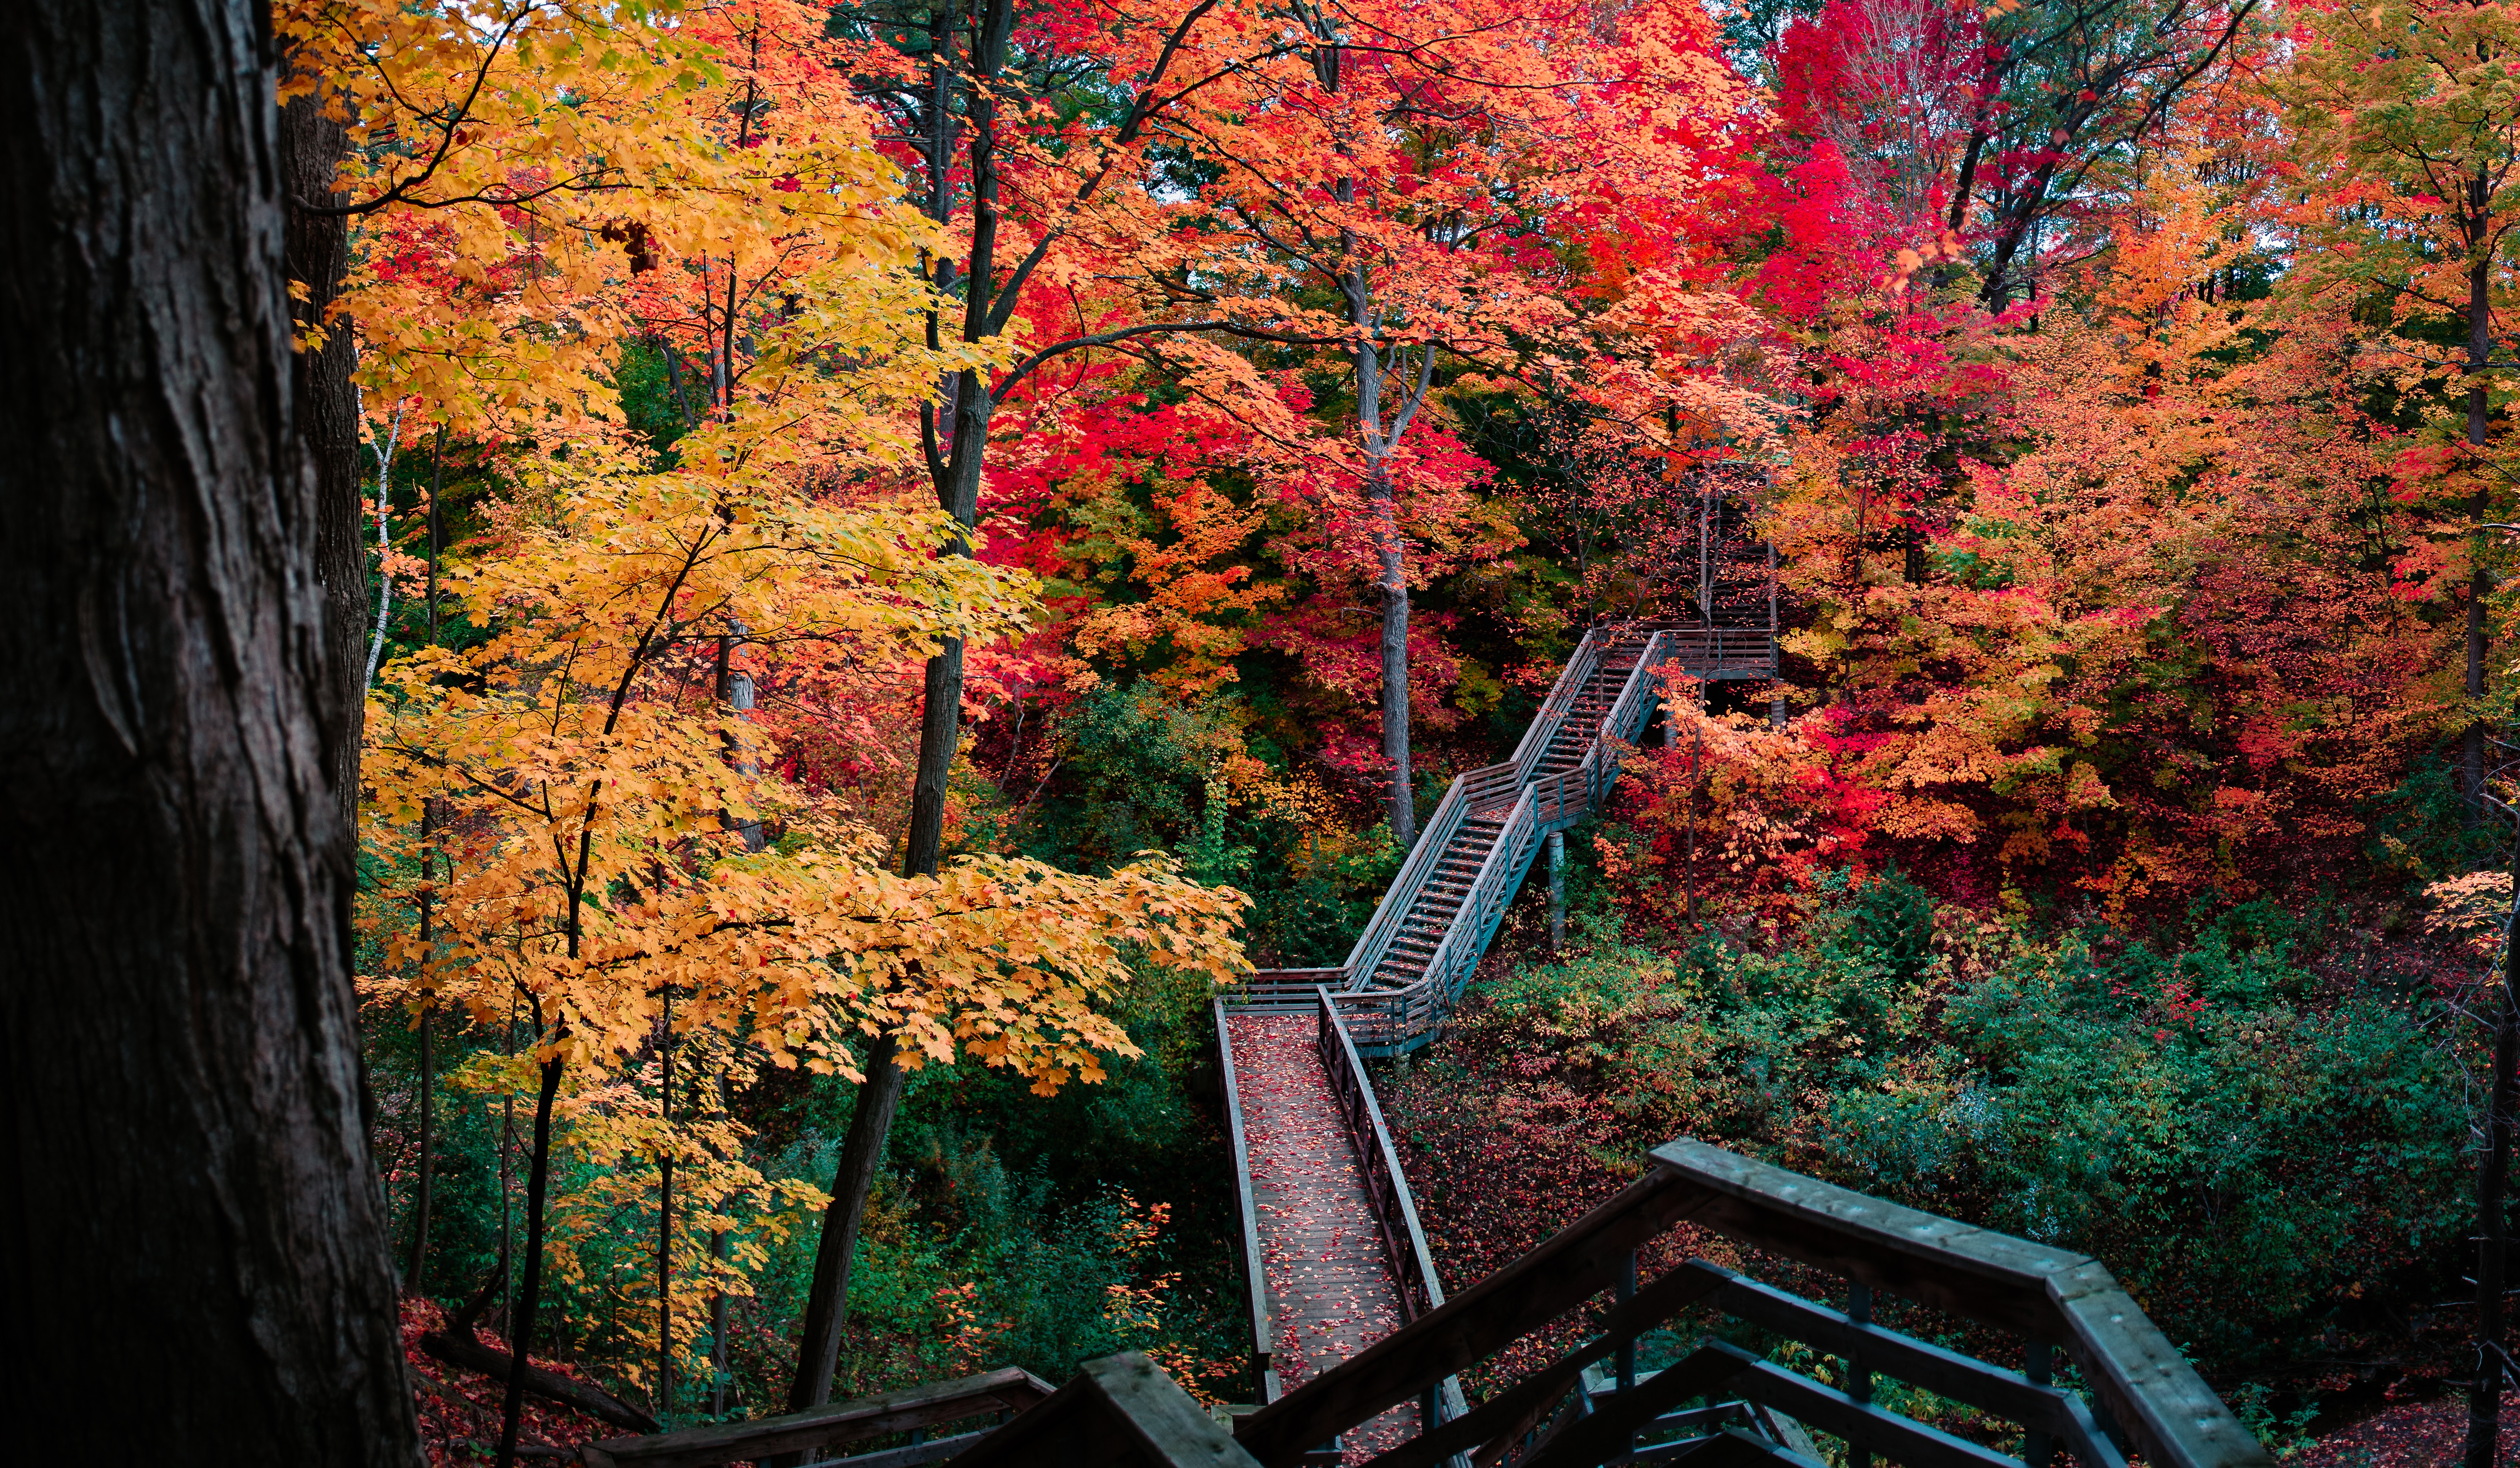 red, orange, and yellow fall leaves in the forest by a stairway